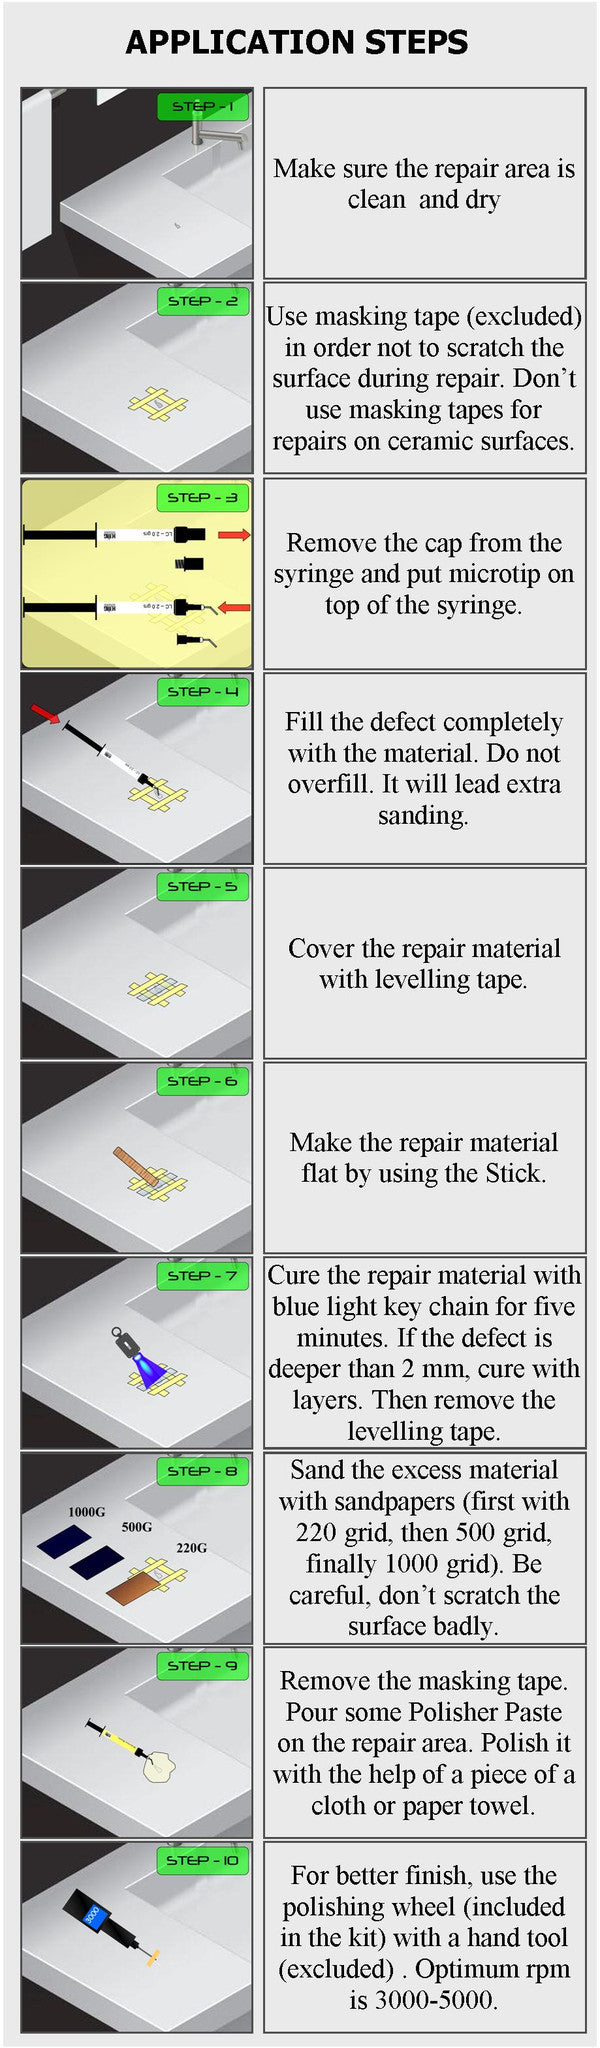 SURFACE REPAIR KIT FOR SMALL DEFECTS - OLC FLOW 2.0 Grams